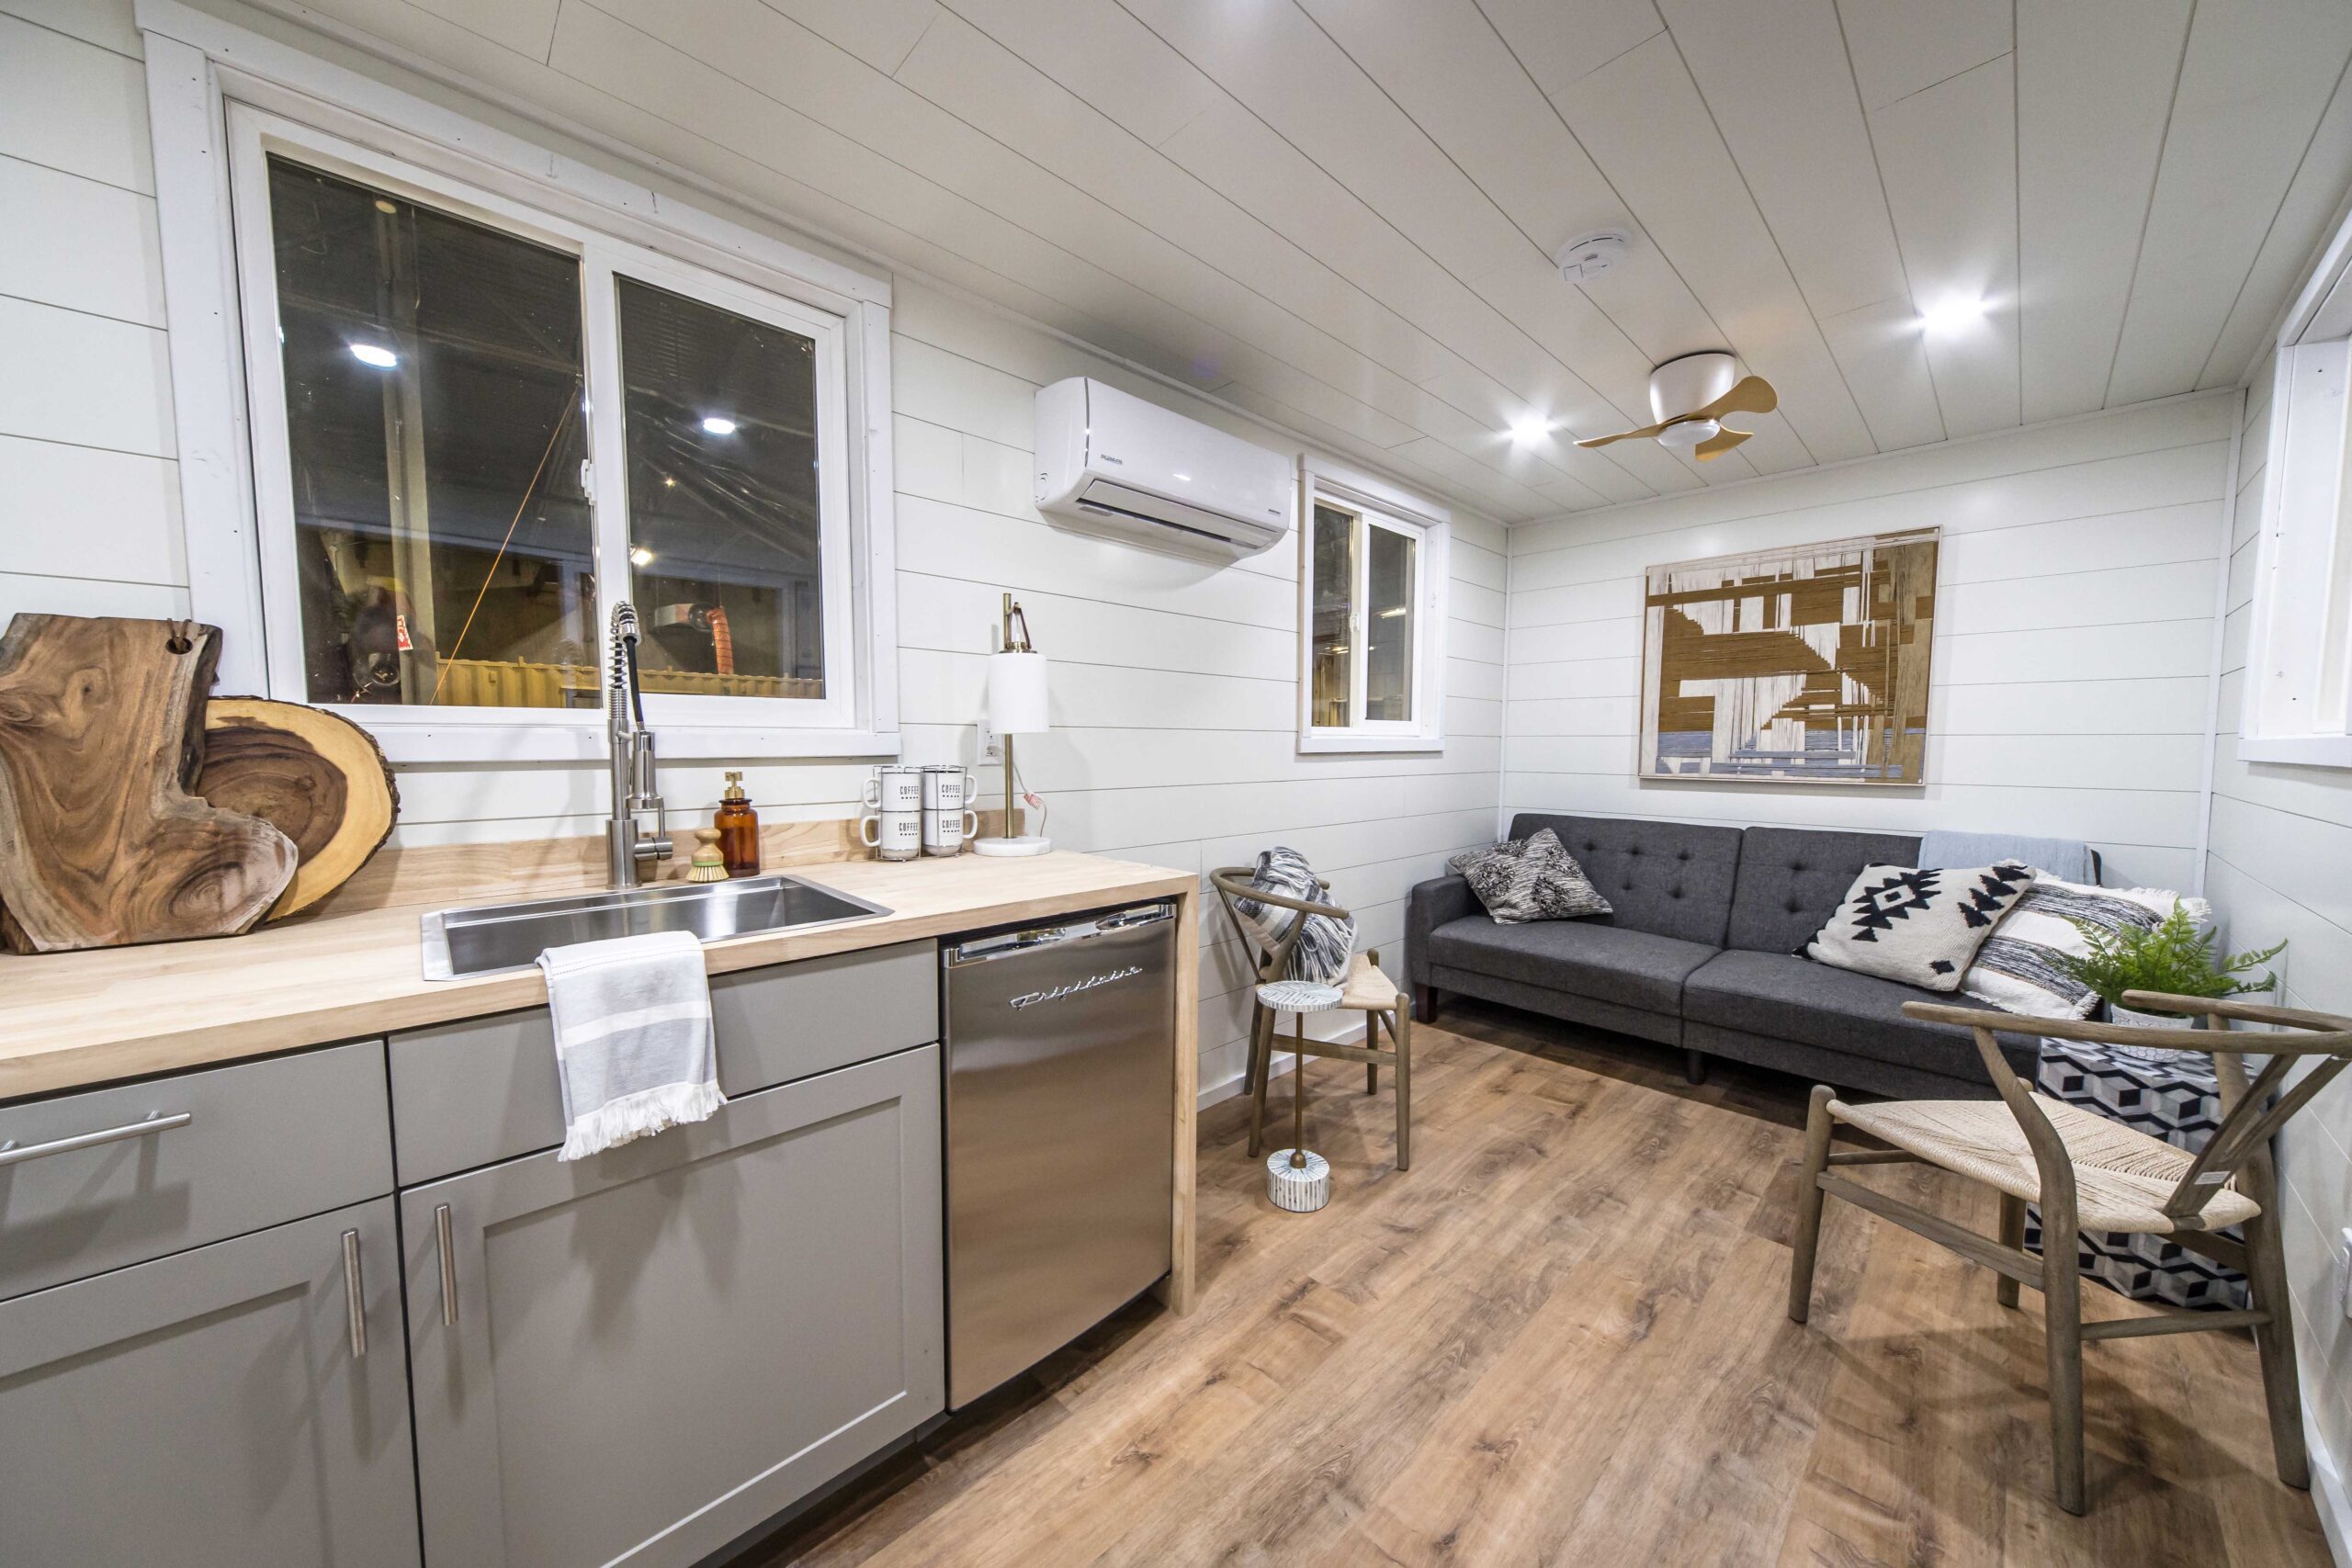 The Ezra: 20ft Container Home interior